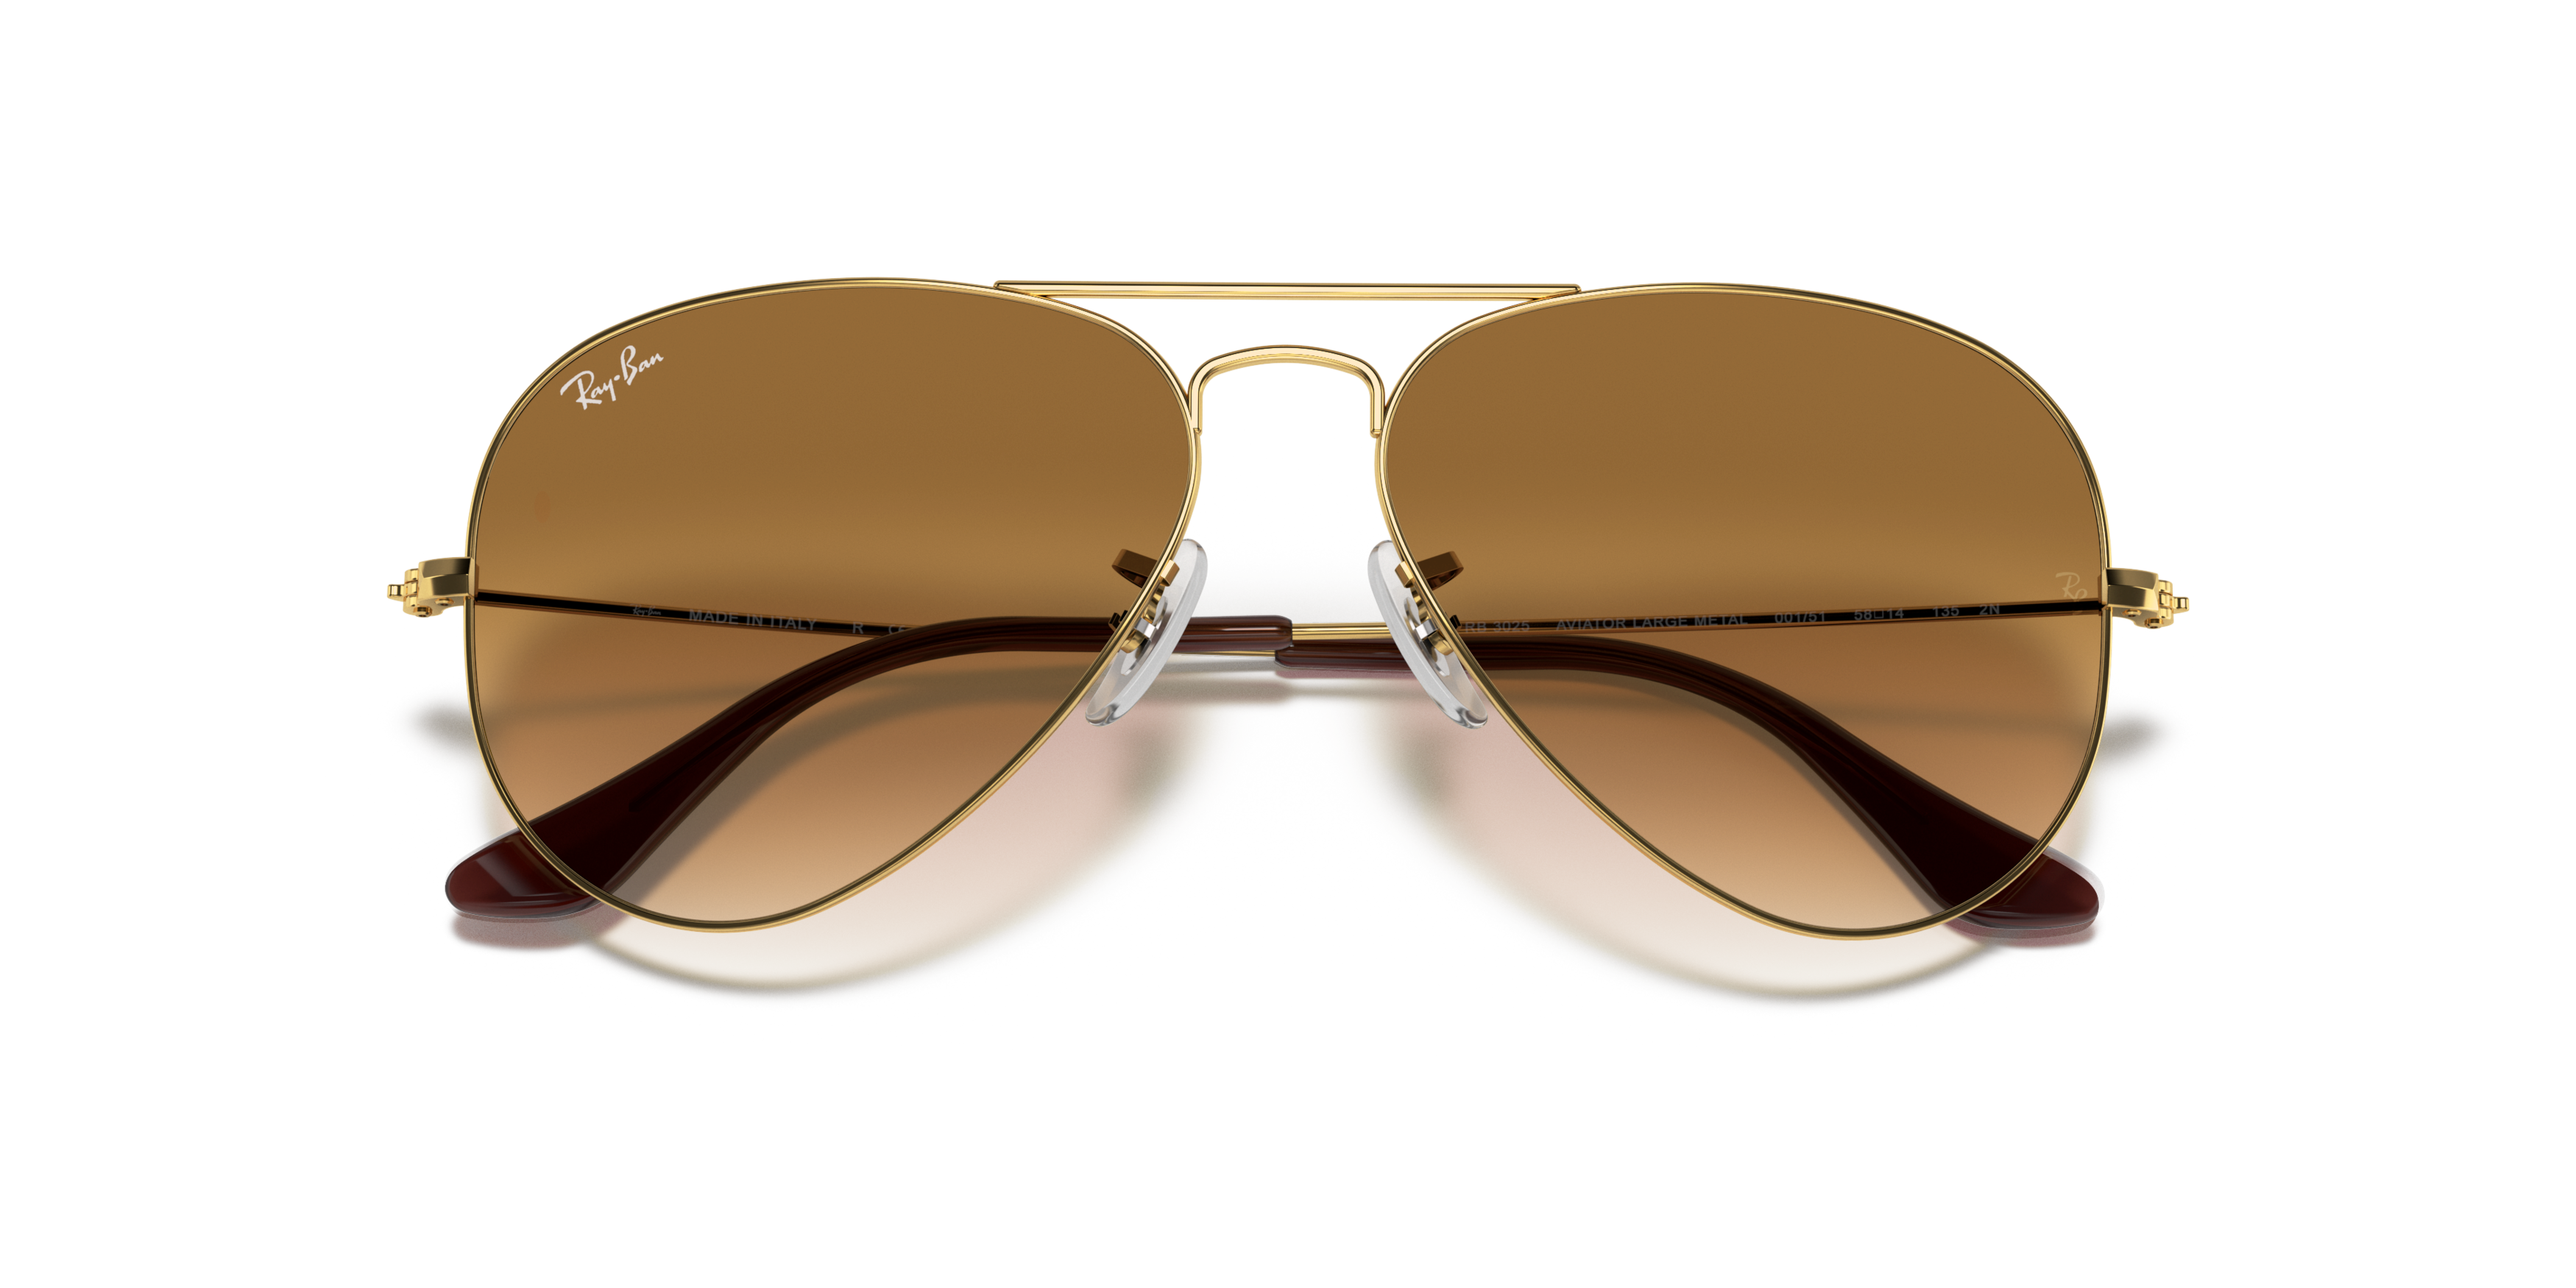 Folded Ray-Ban Aviator RB 3025 (001/51) Sunglasses Brown / Gold